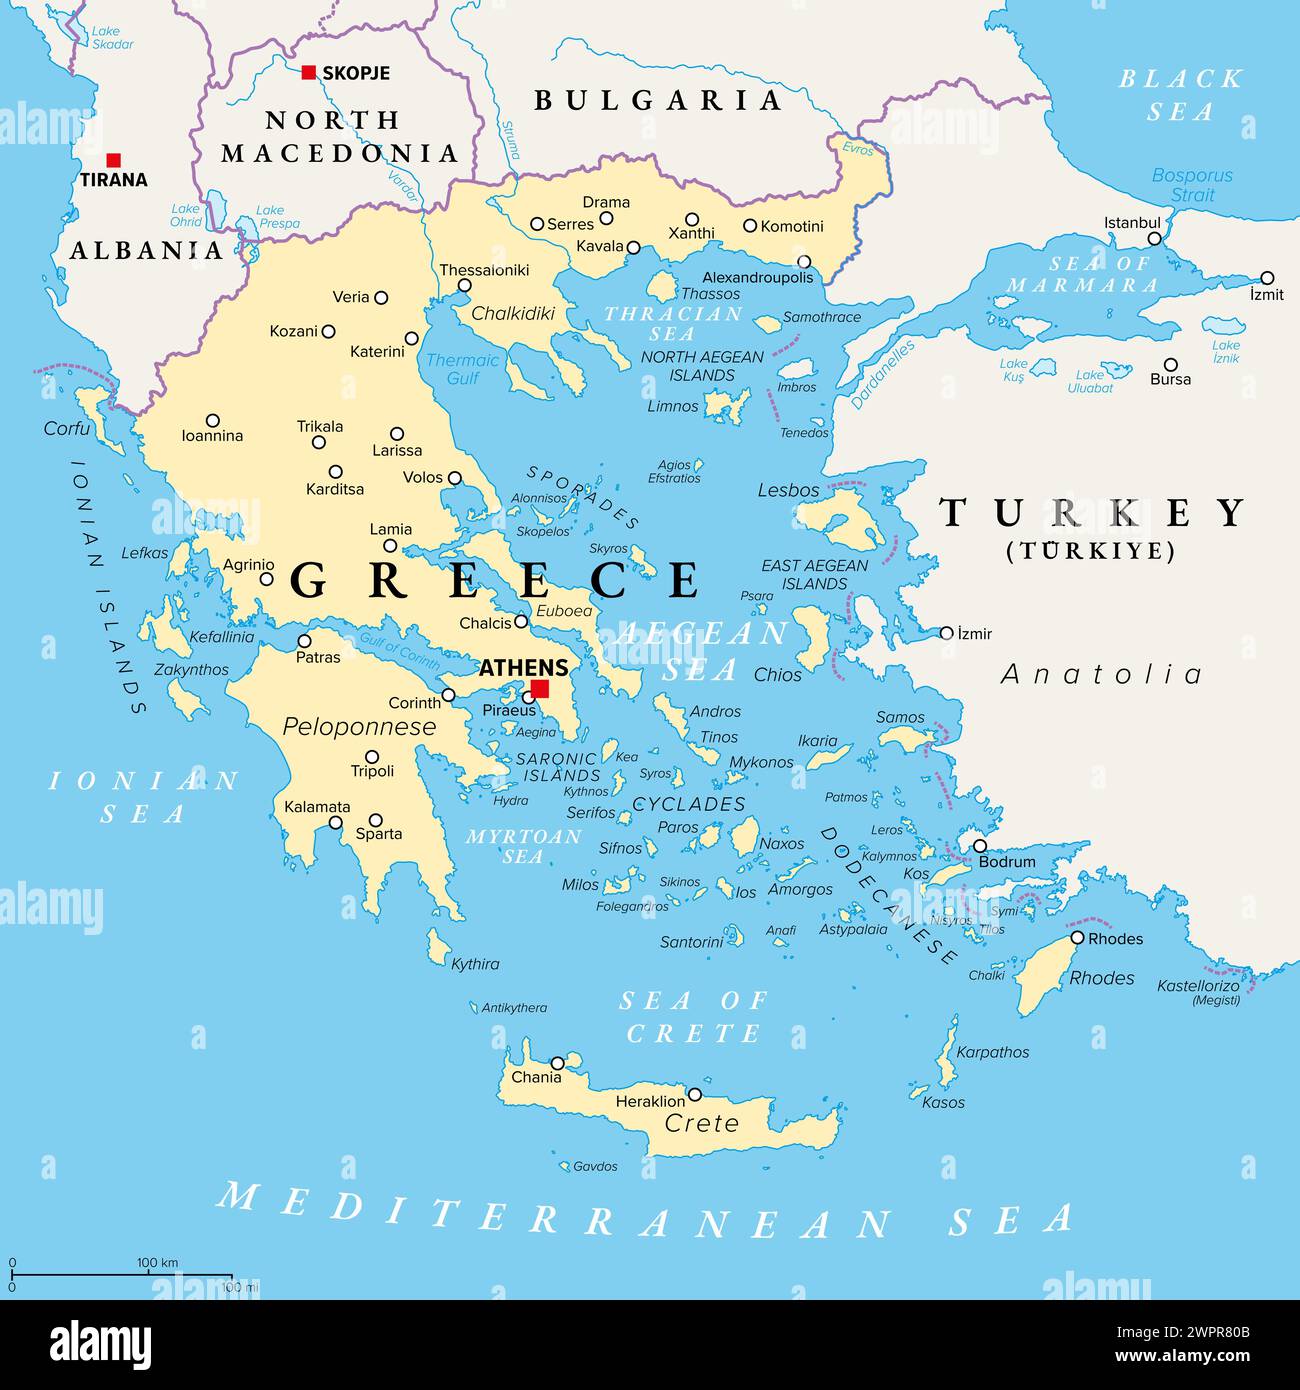 Greece, the Hellenic Republic, political map. Country in Southeast Europe on the southern tip of the Balkan peninsula, with capital Athens. Stock Photo